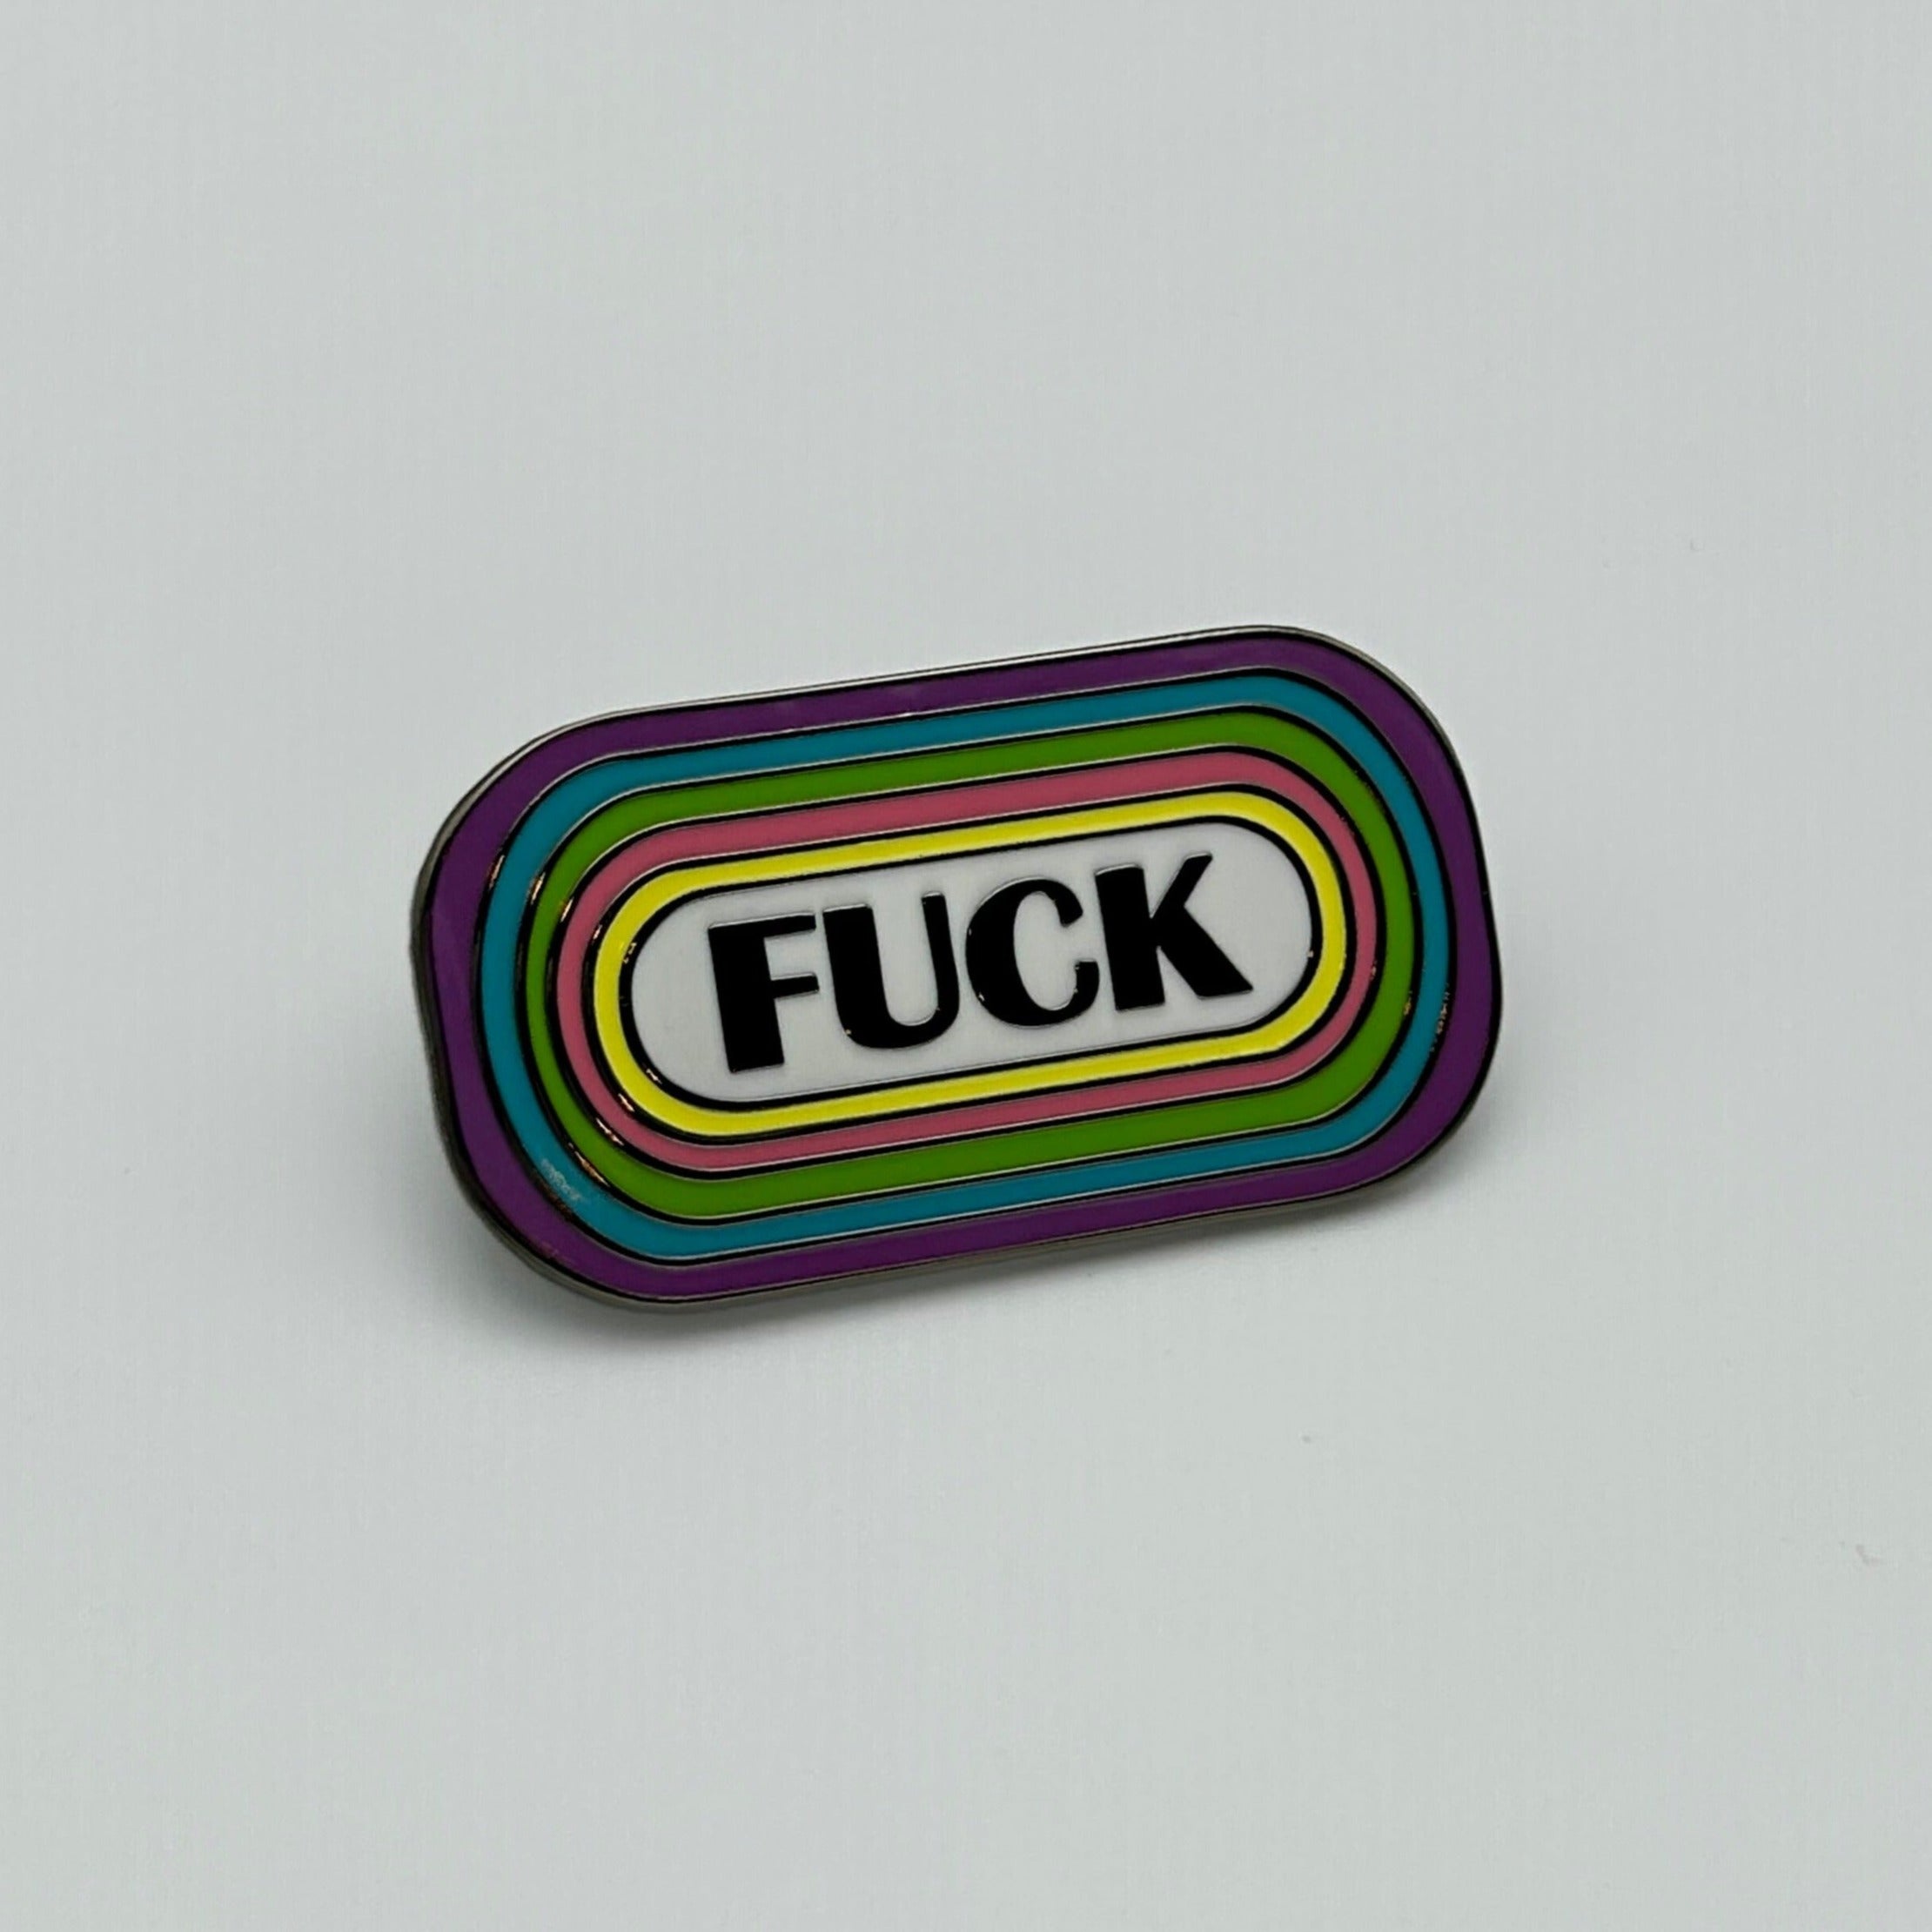 A nickel-plated enamel pin that says "FUCK" in capital lettering. Circling the word is yellow, pink, green, blue, and purple lines.